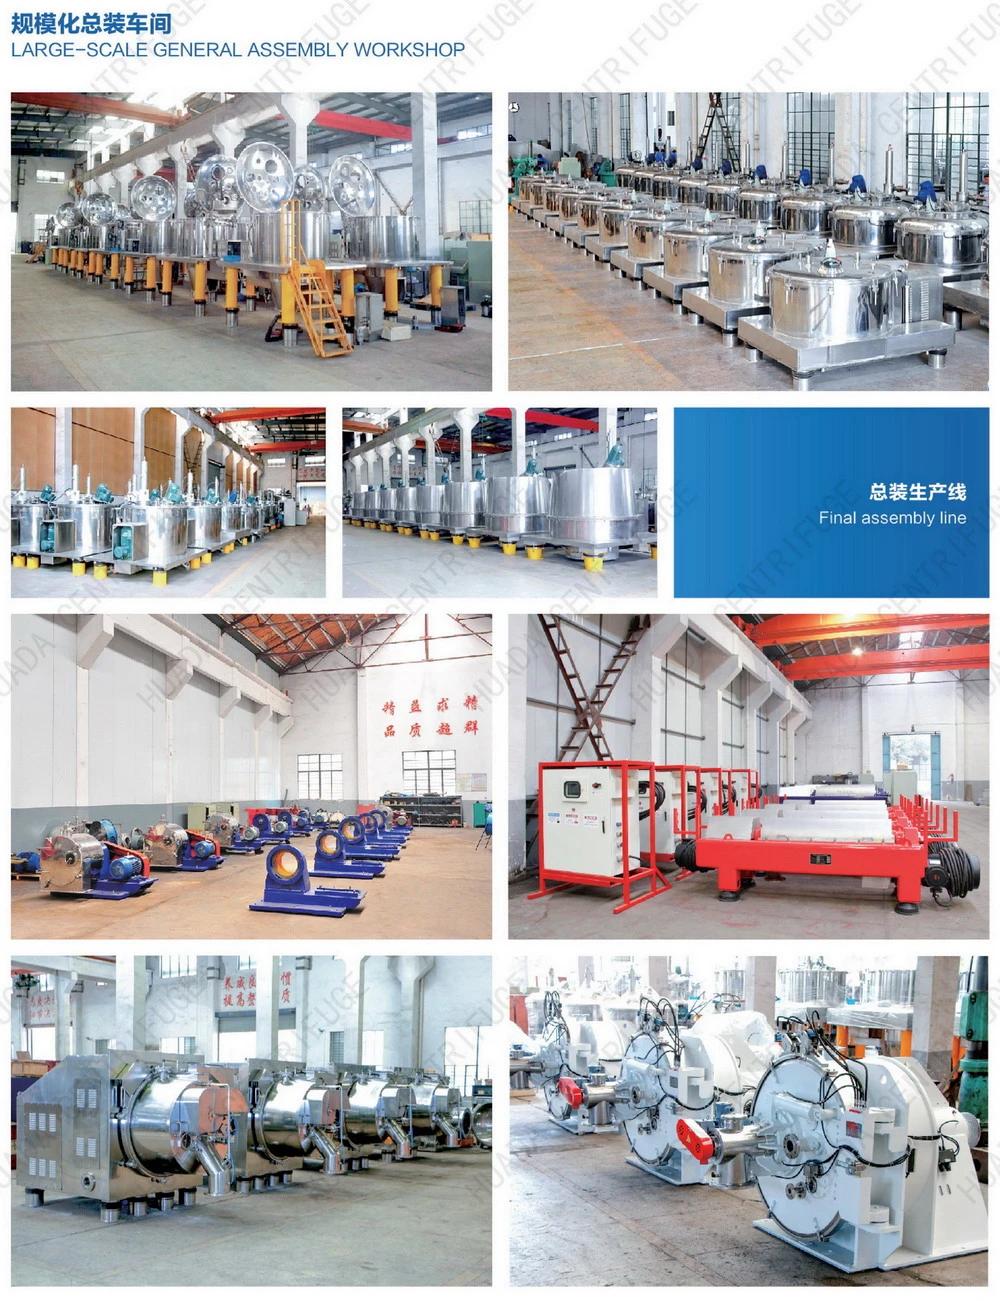 Psd Automatic Small Top-Suspended Sugar Separation Huada Centrifuges